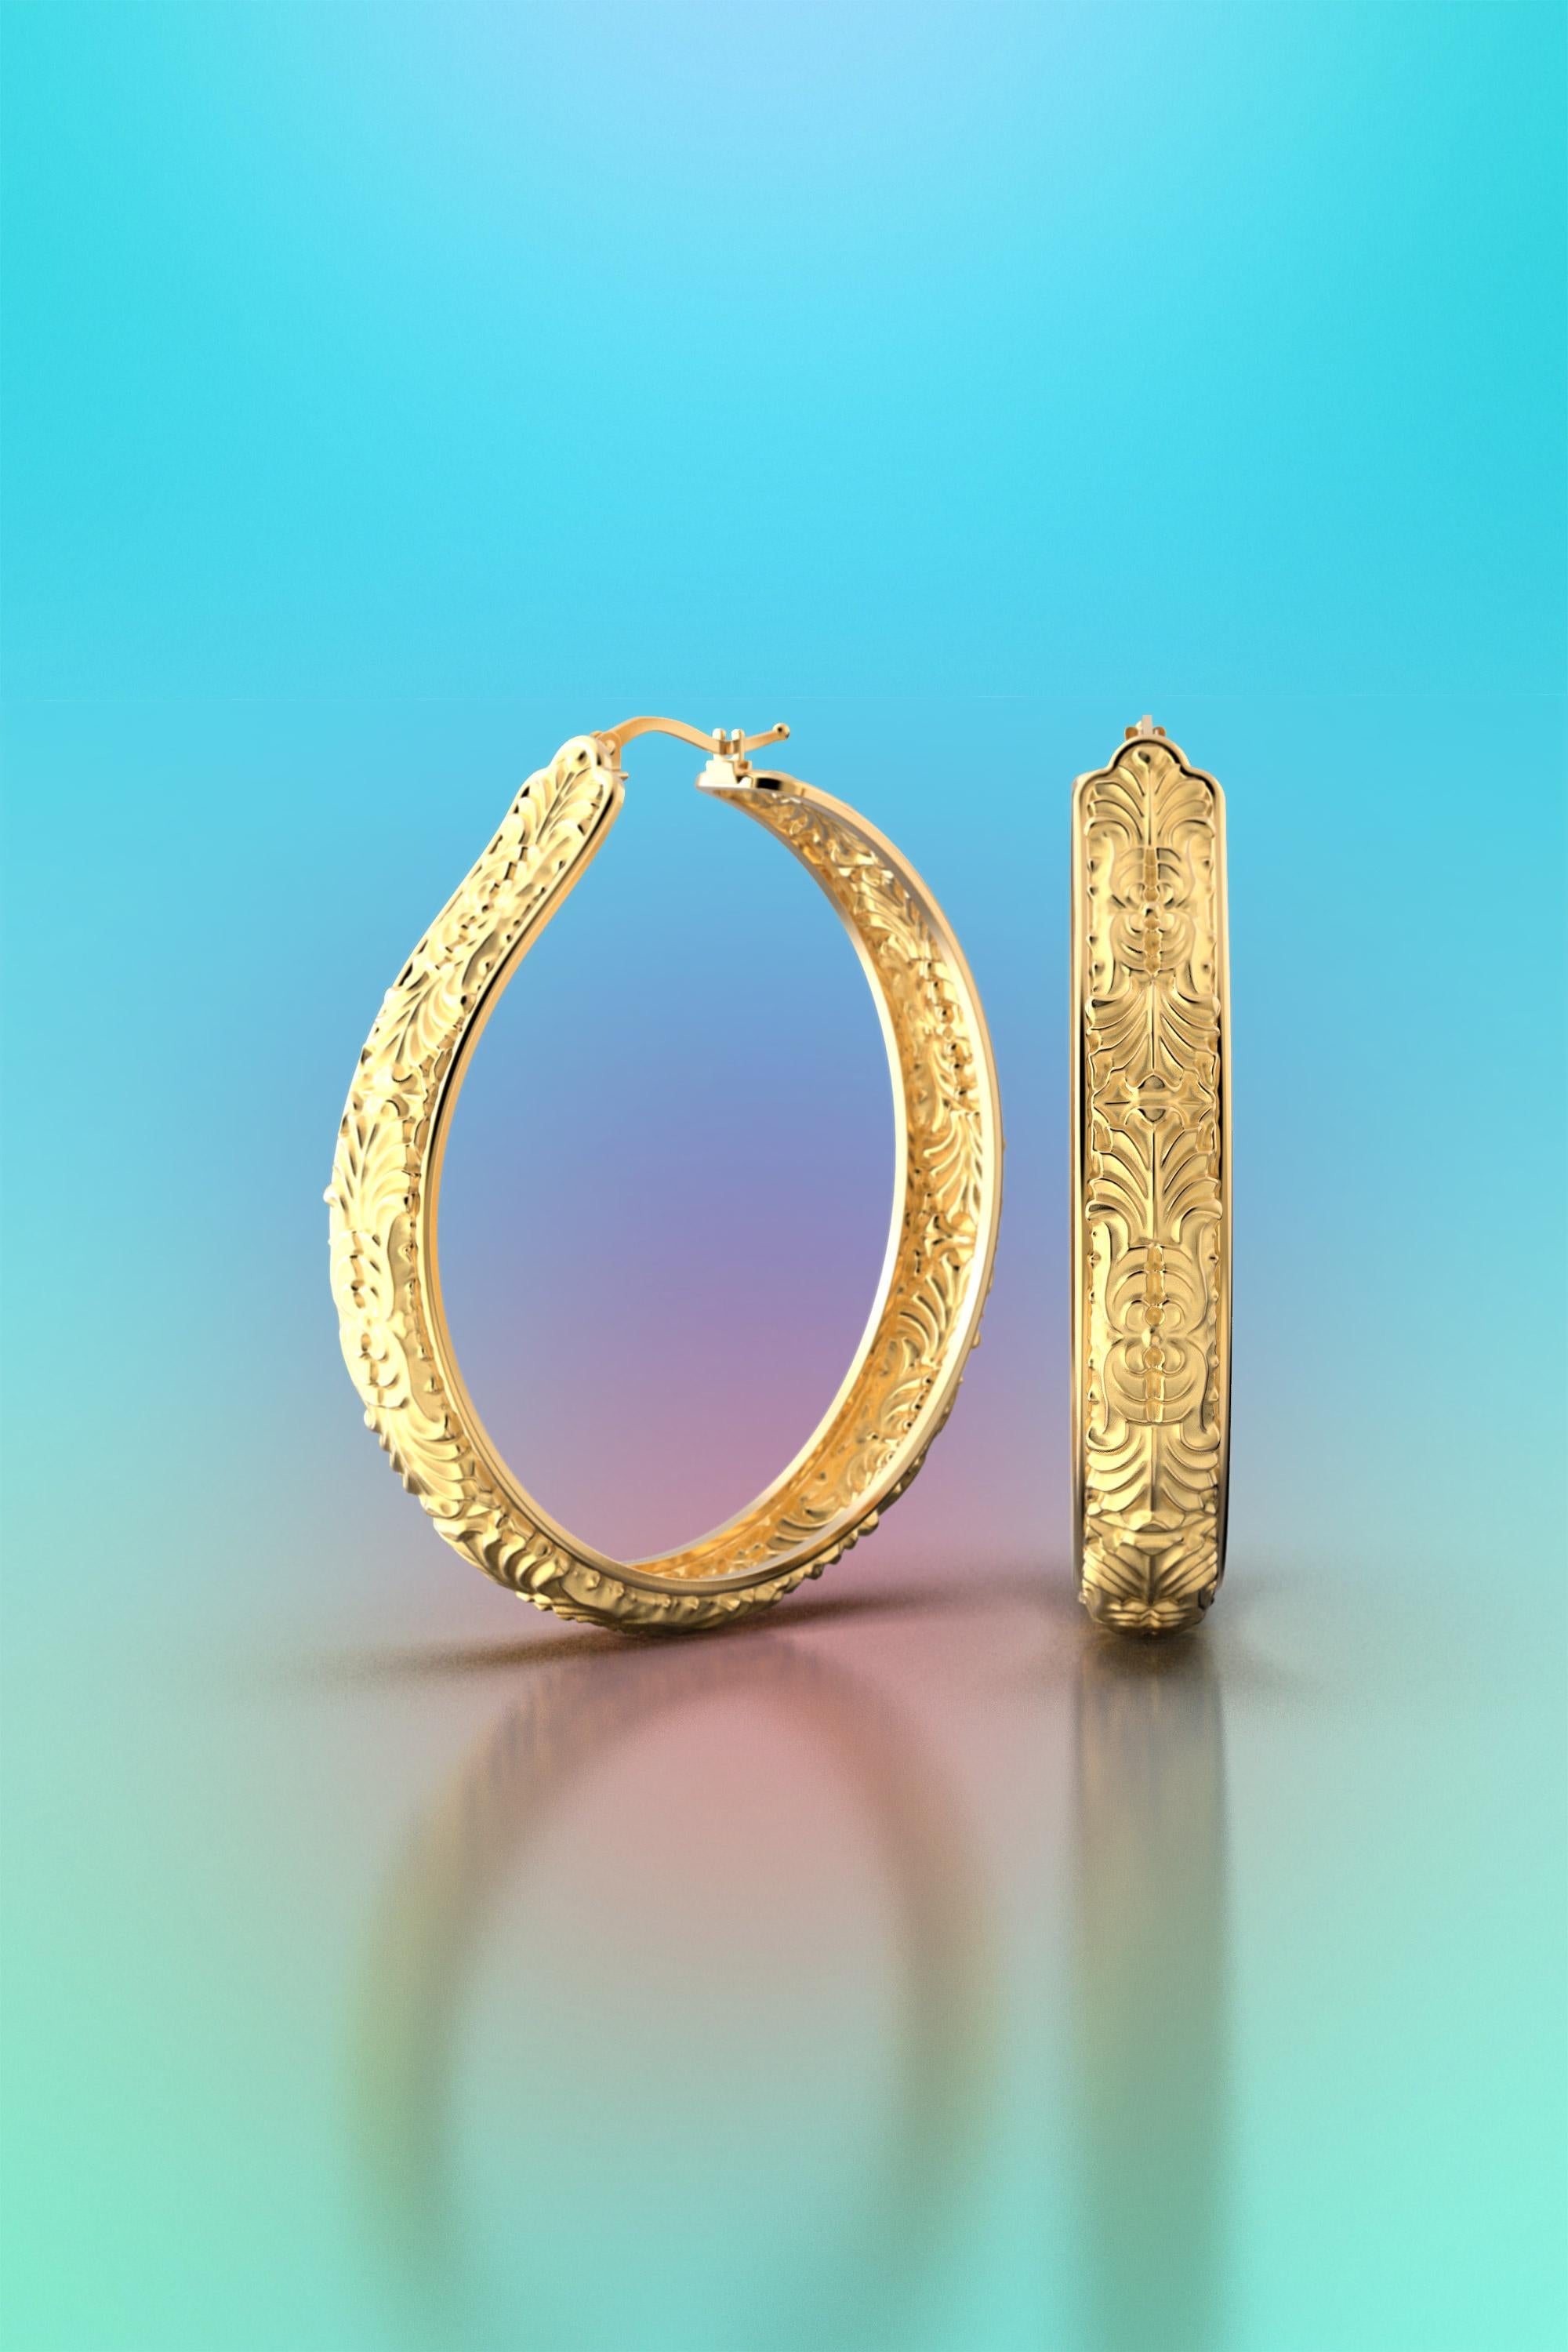 Women's  Extra Large Stunning hoop earrings in 18k Gold Made in Italy, made to order. For Sale